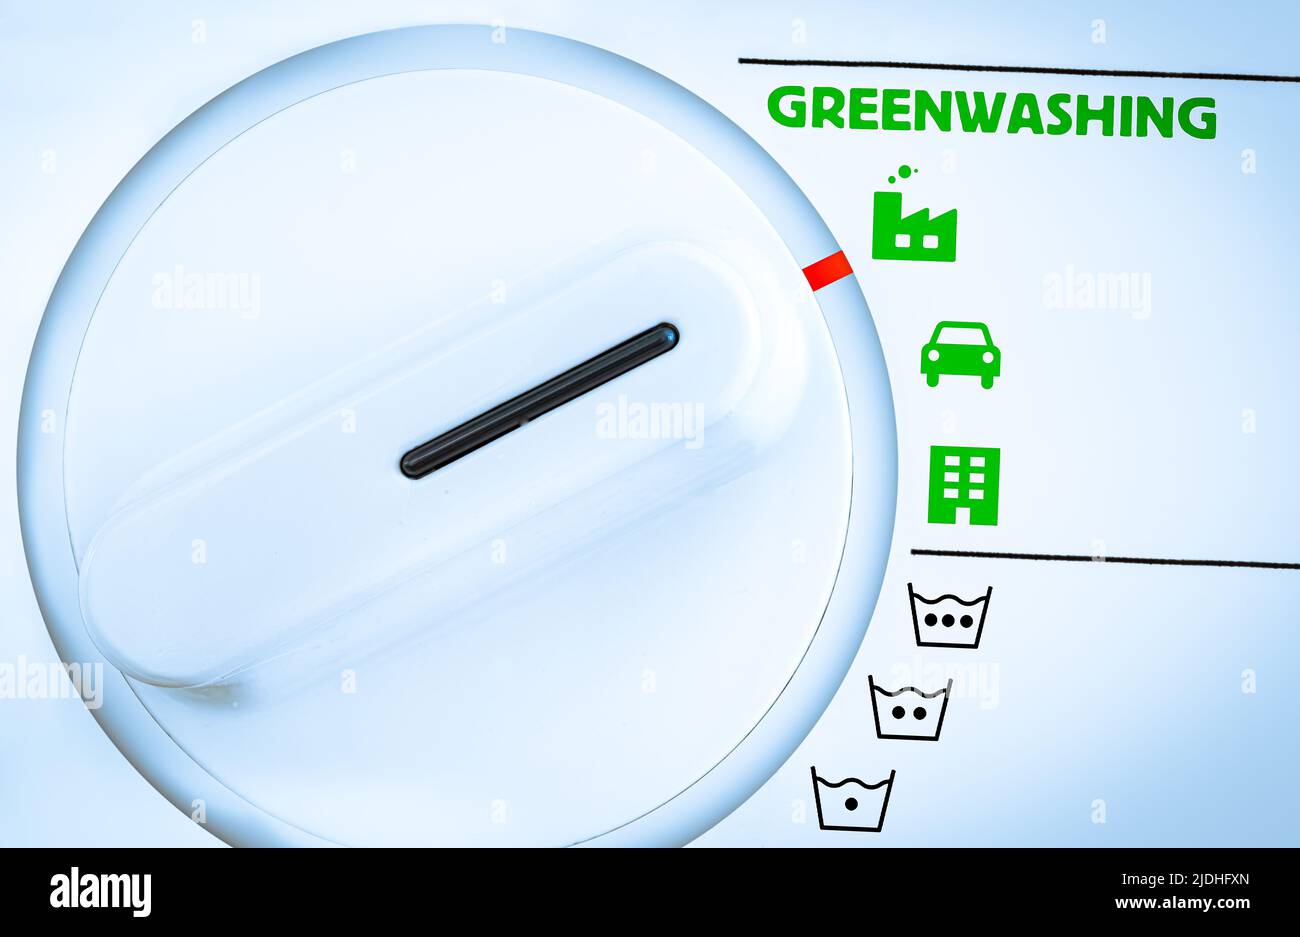 Close-up View of Washing Machine Control Panel with Symbols Showing Different Industries that can be Greenwashed Stock Photo